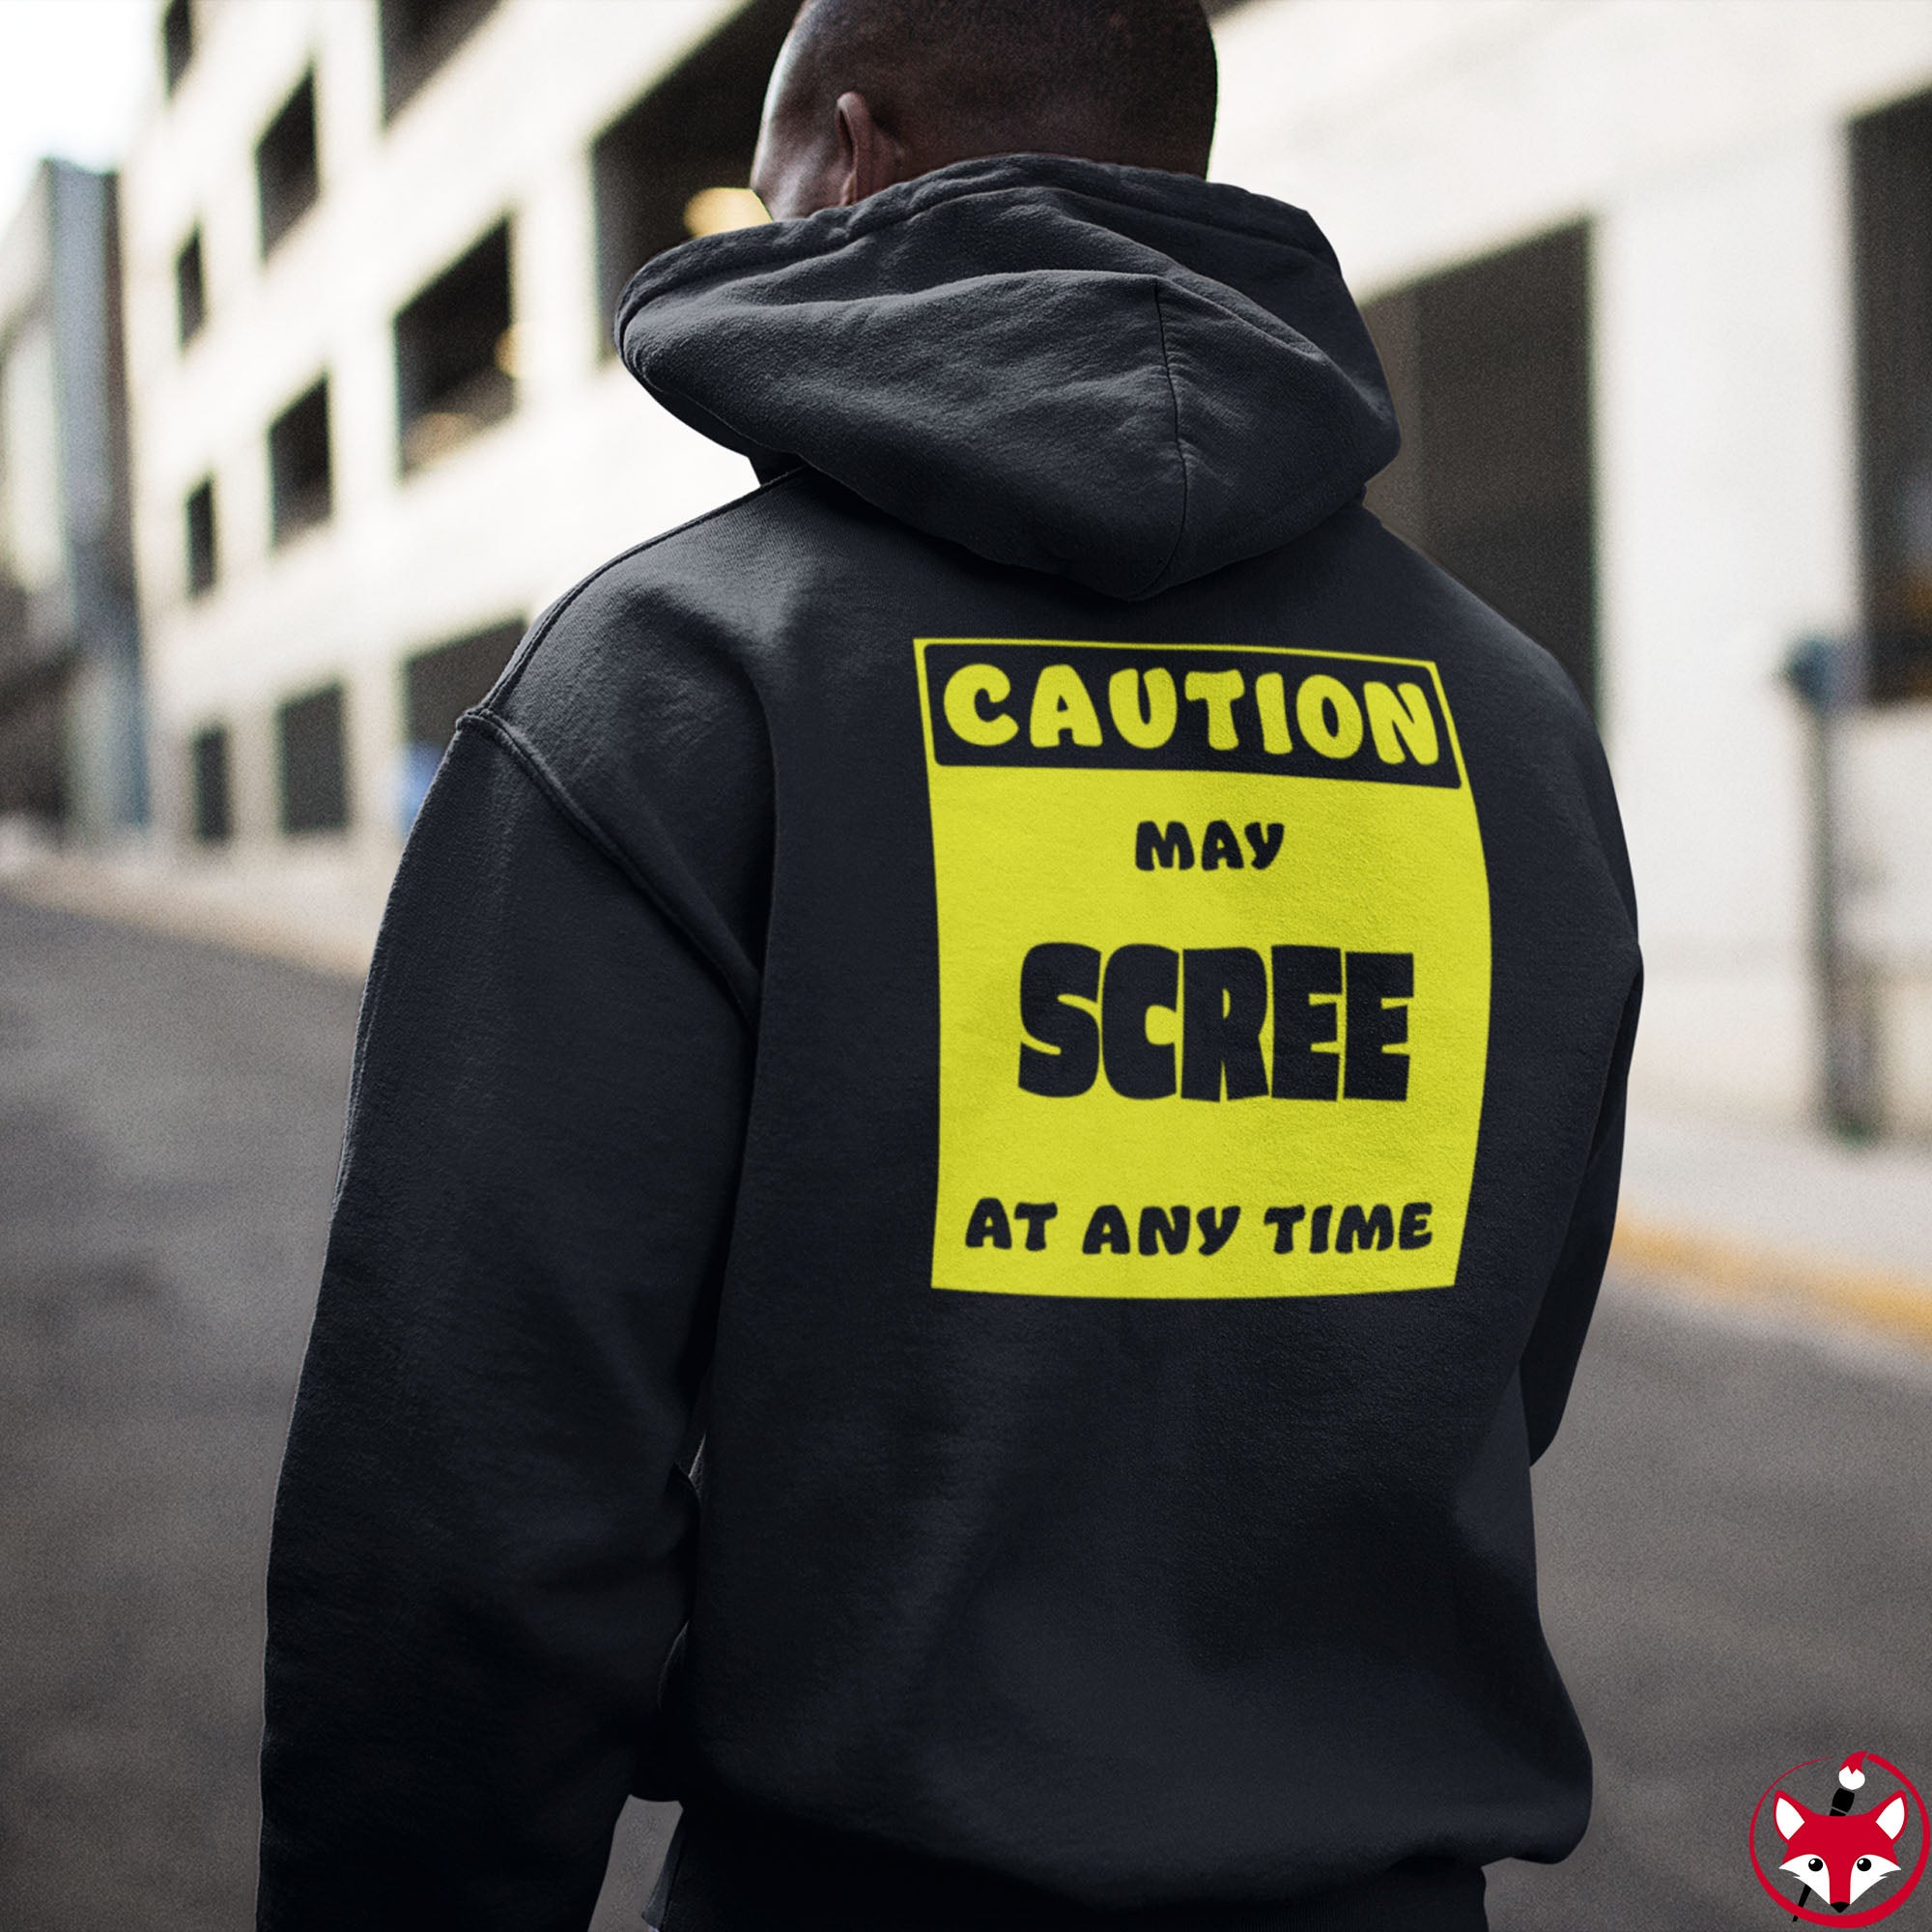 CAUTION! May SCREE at any time! - Hoodie Hoodie AFLT-Whootorca 